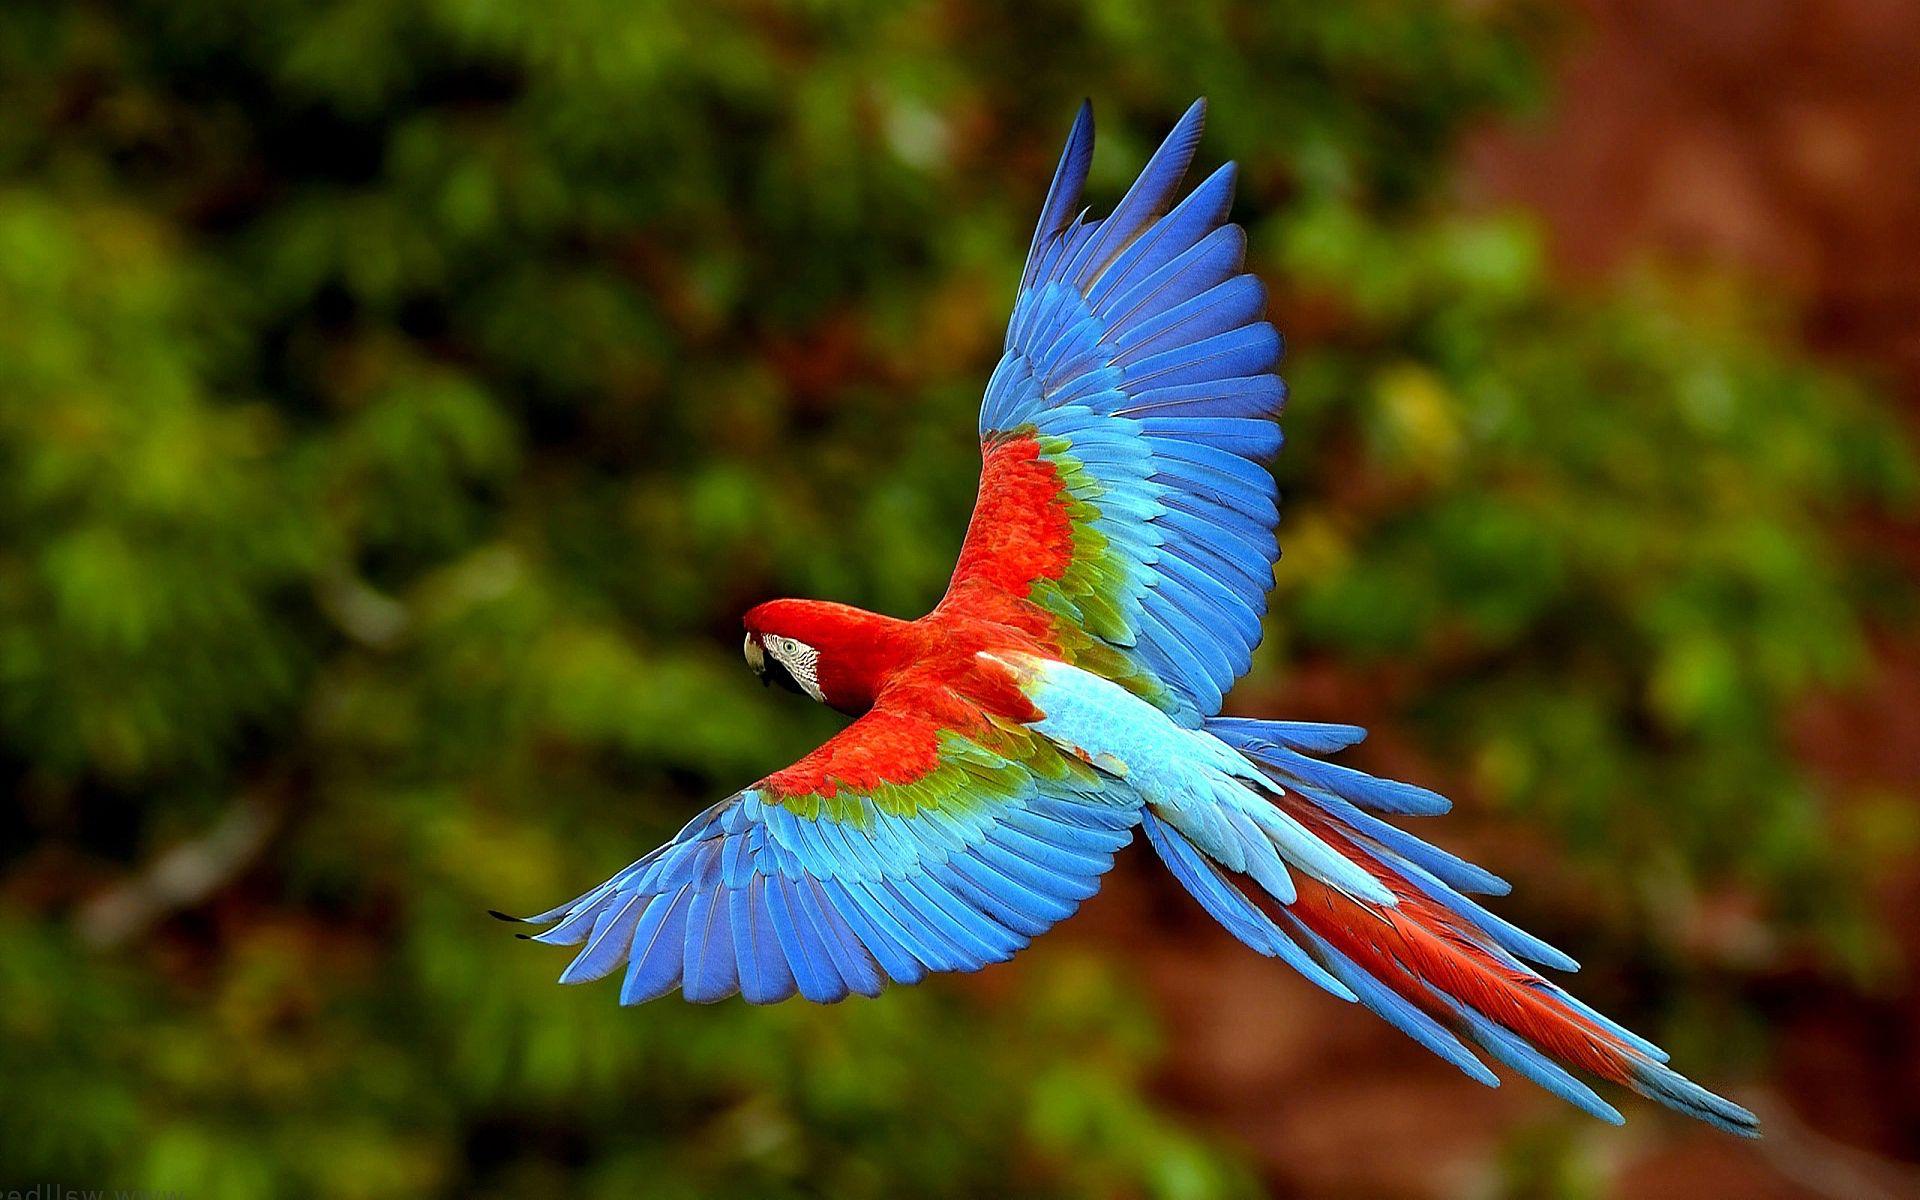 HD birds wallpaper download for pc - Free HD Wallpapers